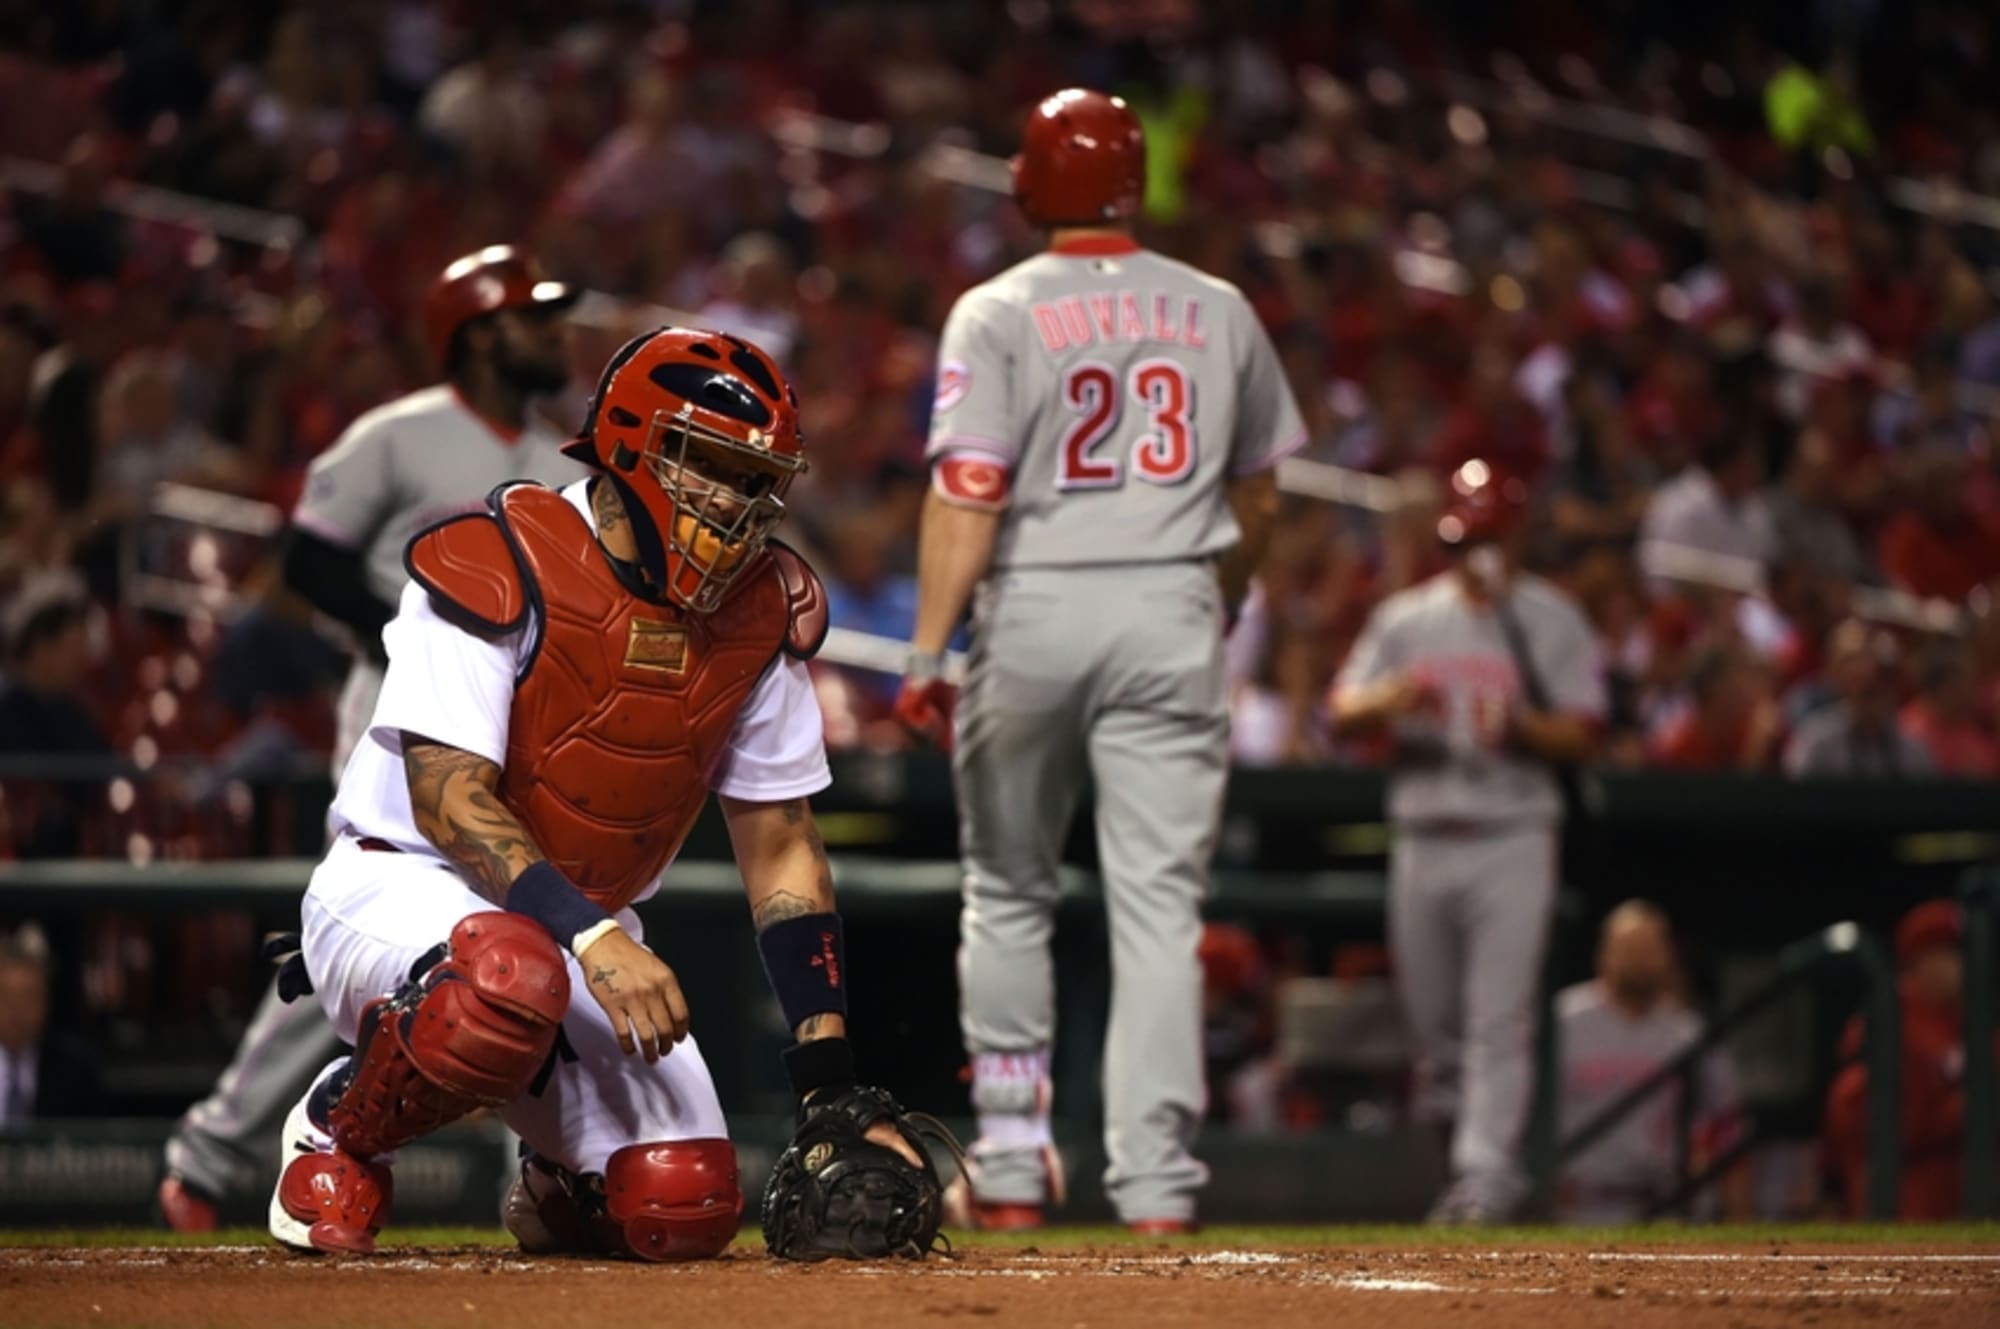 St. Louis Cardinals: This team stinks and it starts from the head